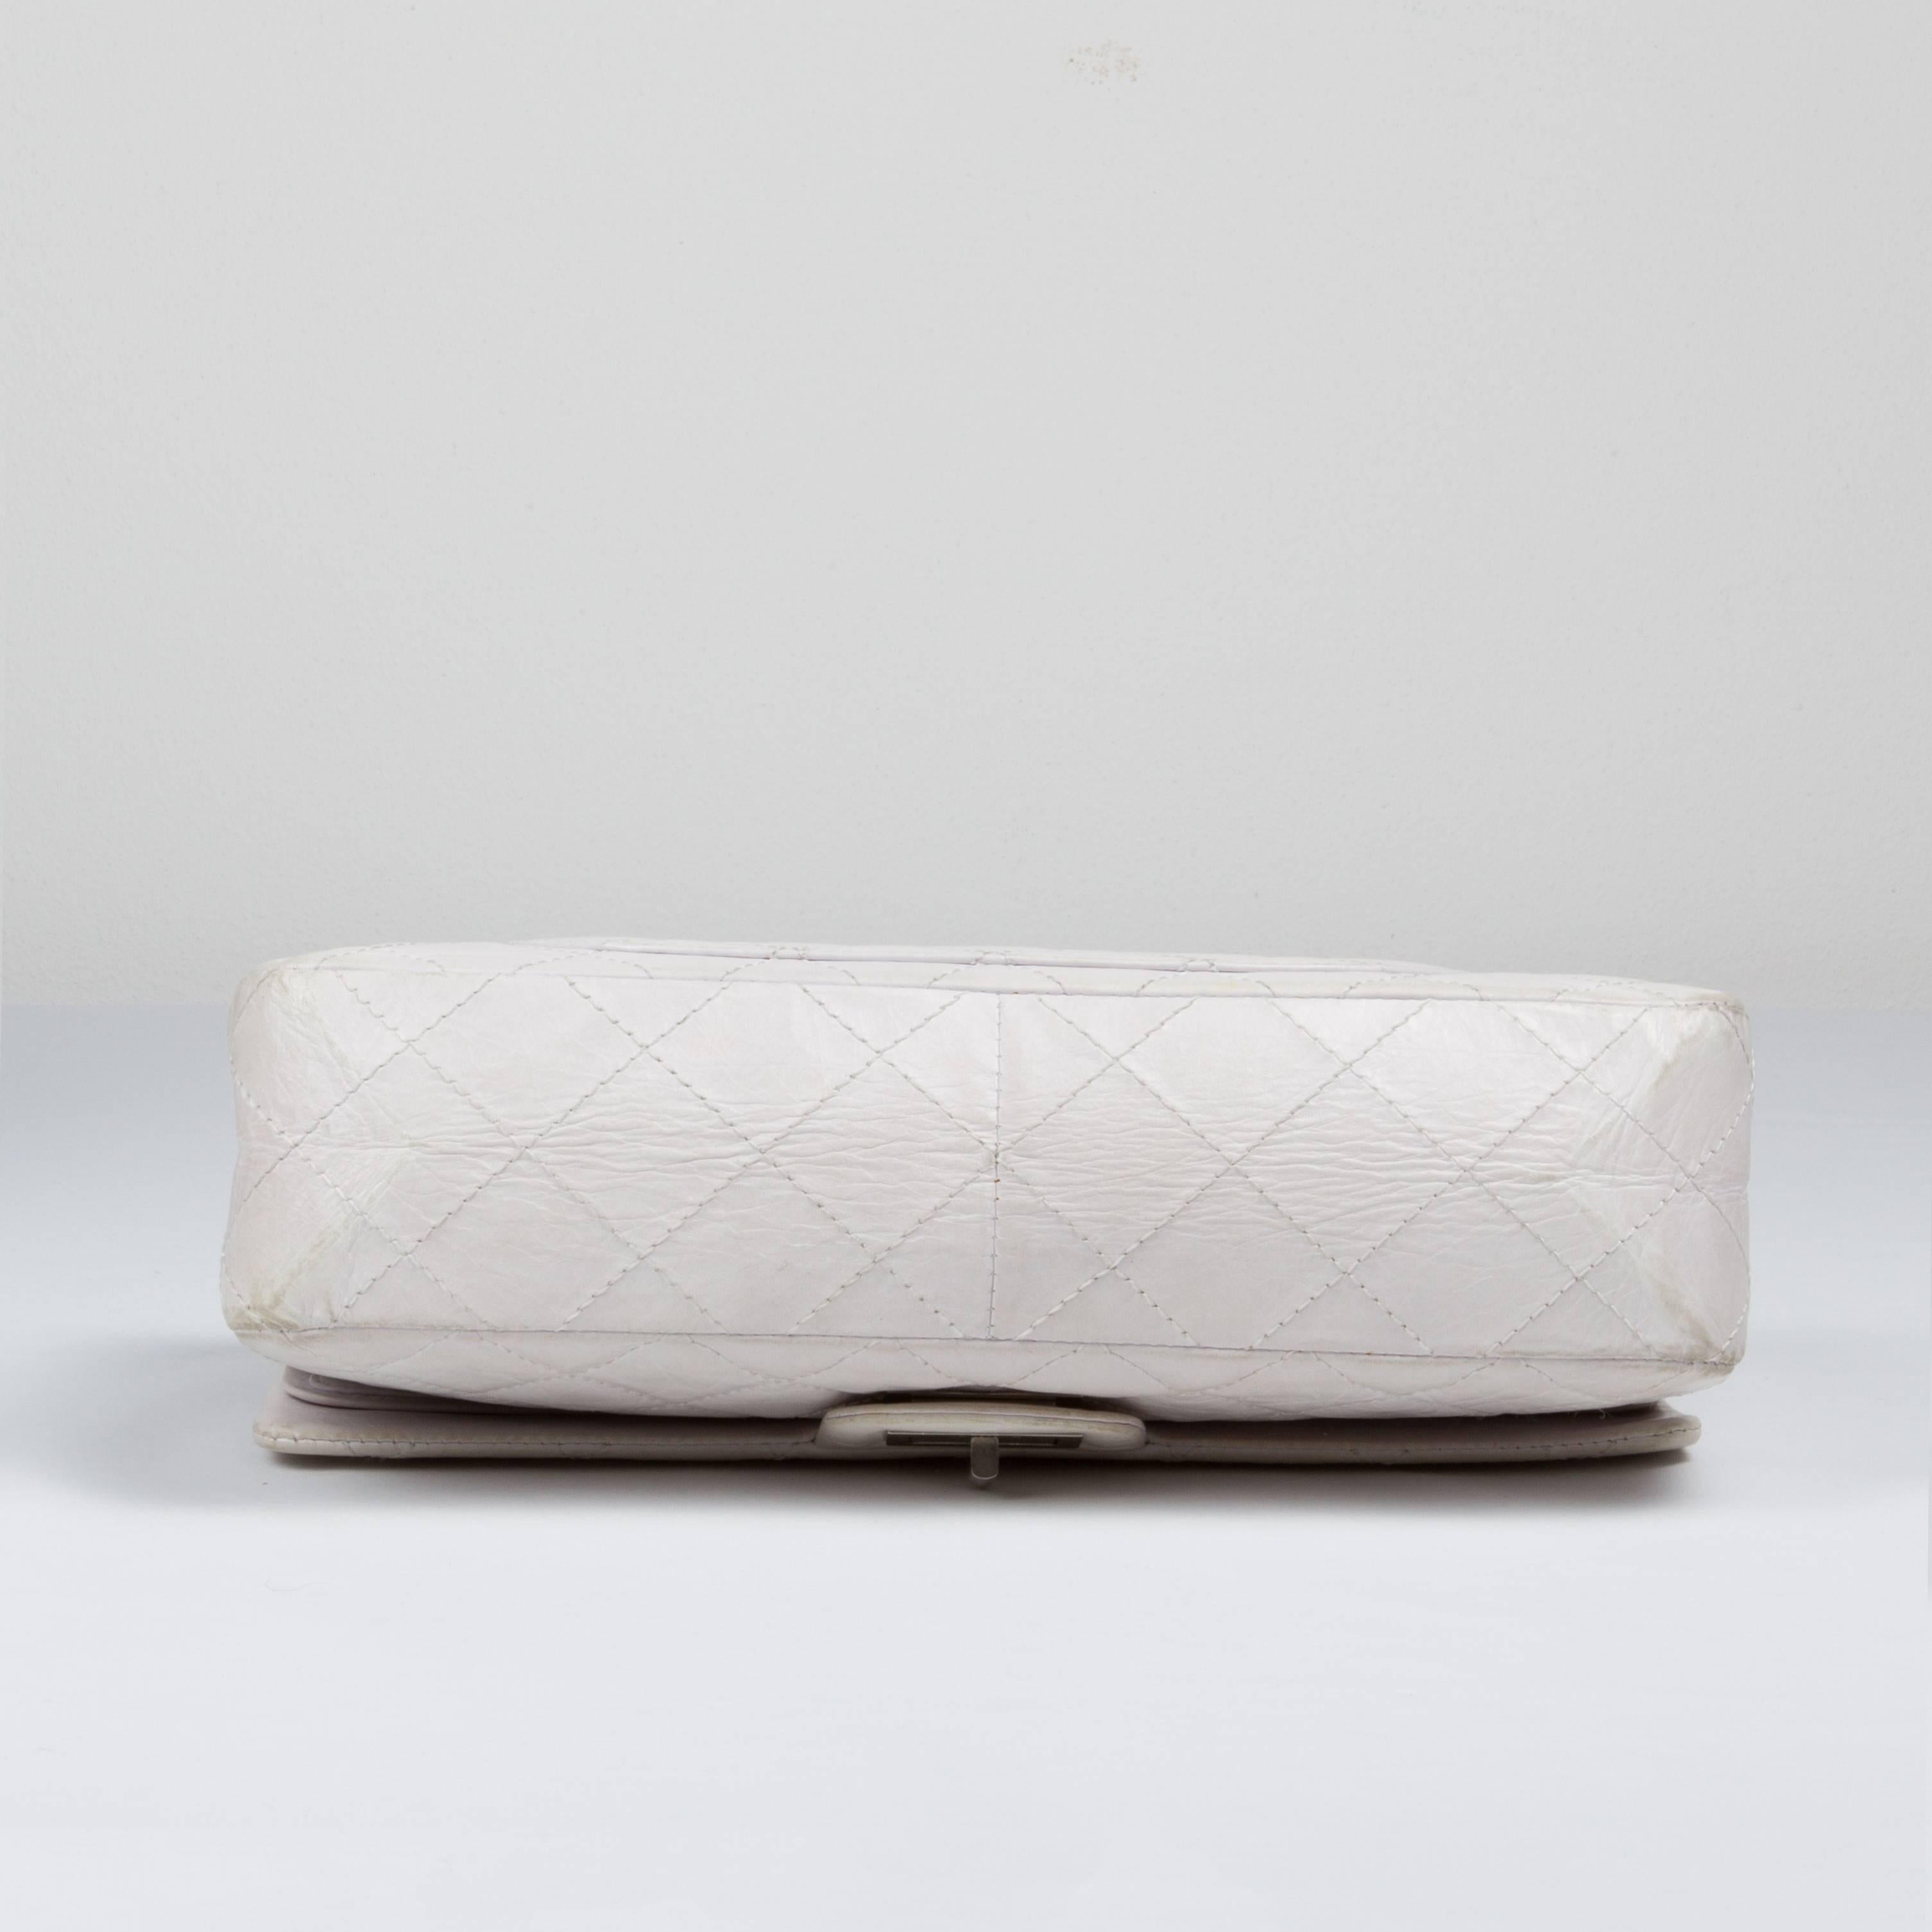 Chanel Reissue 227  White Leather Very Good Condition  In Excellent Condition For Sale In Bologna, Emilia Romagna